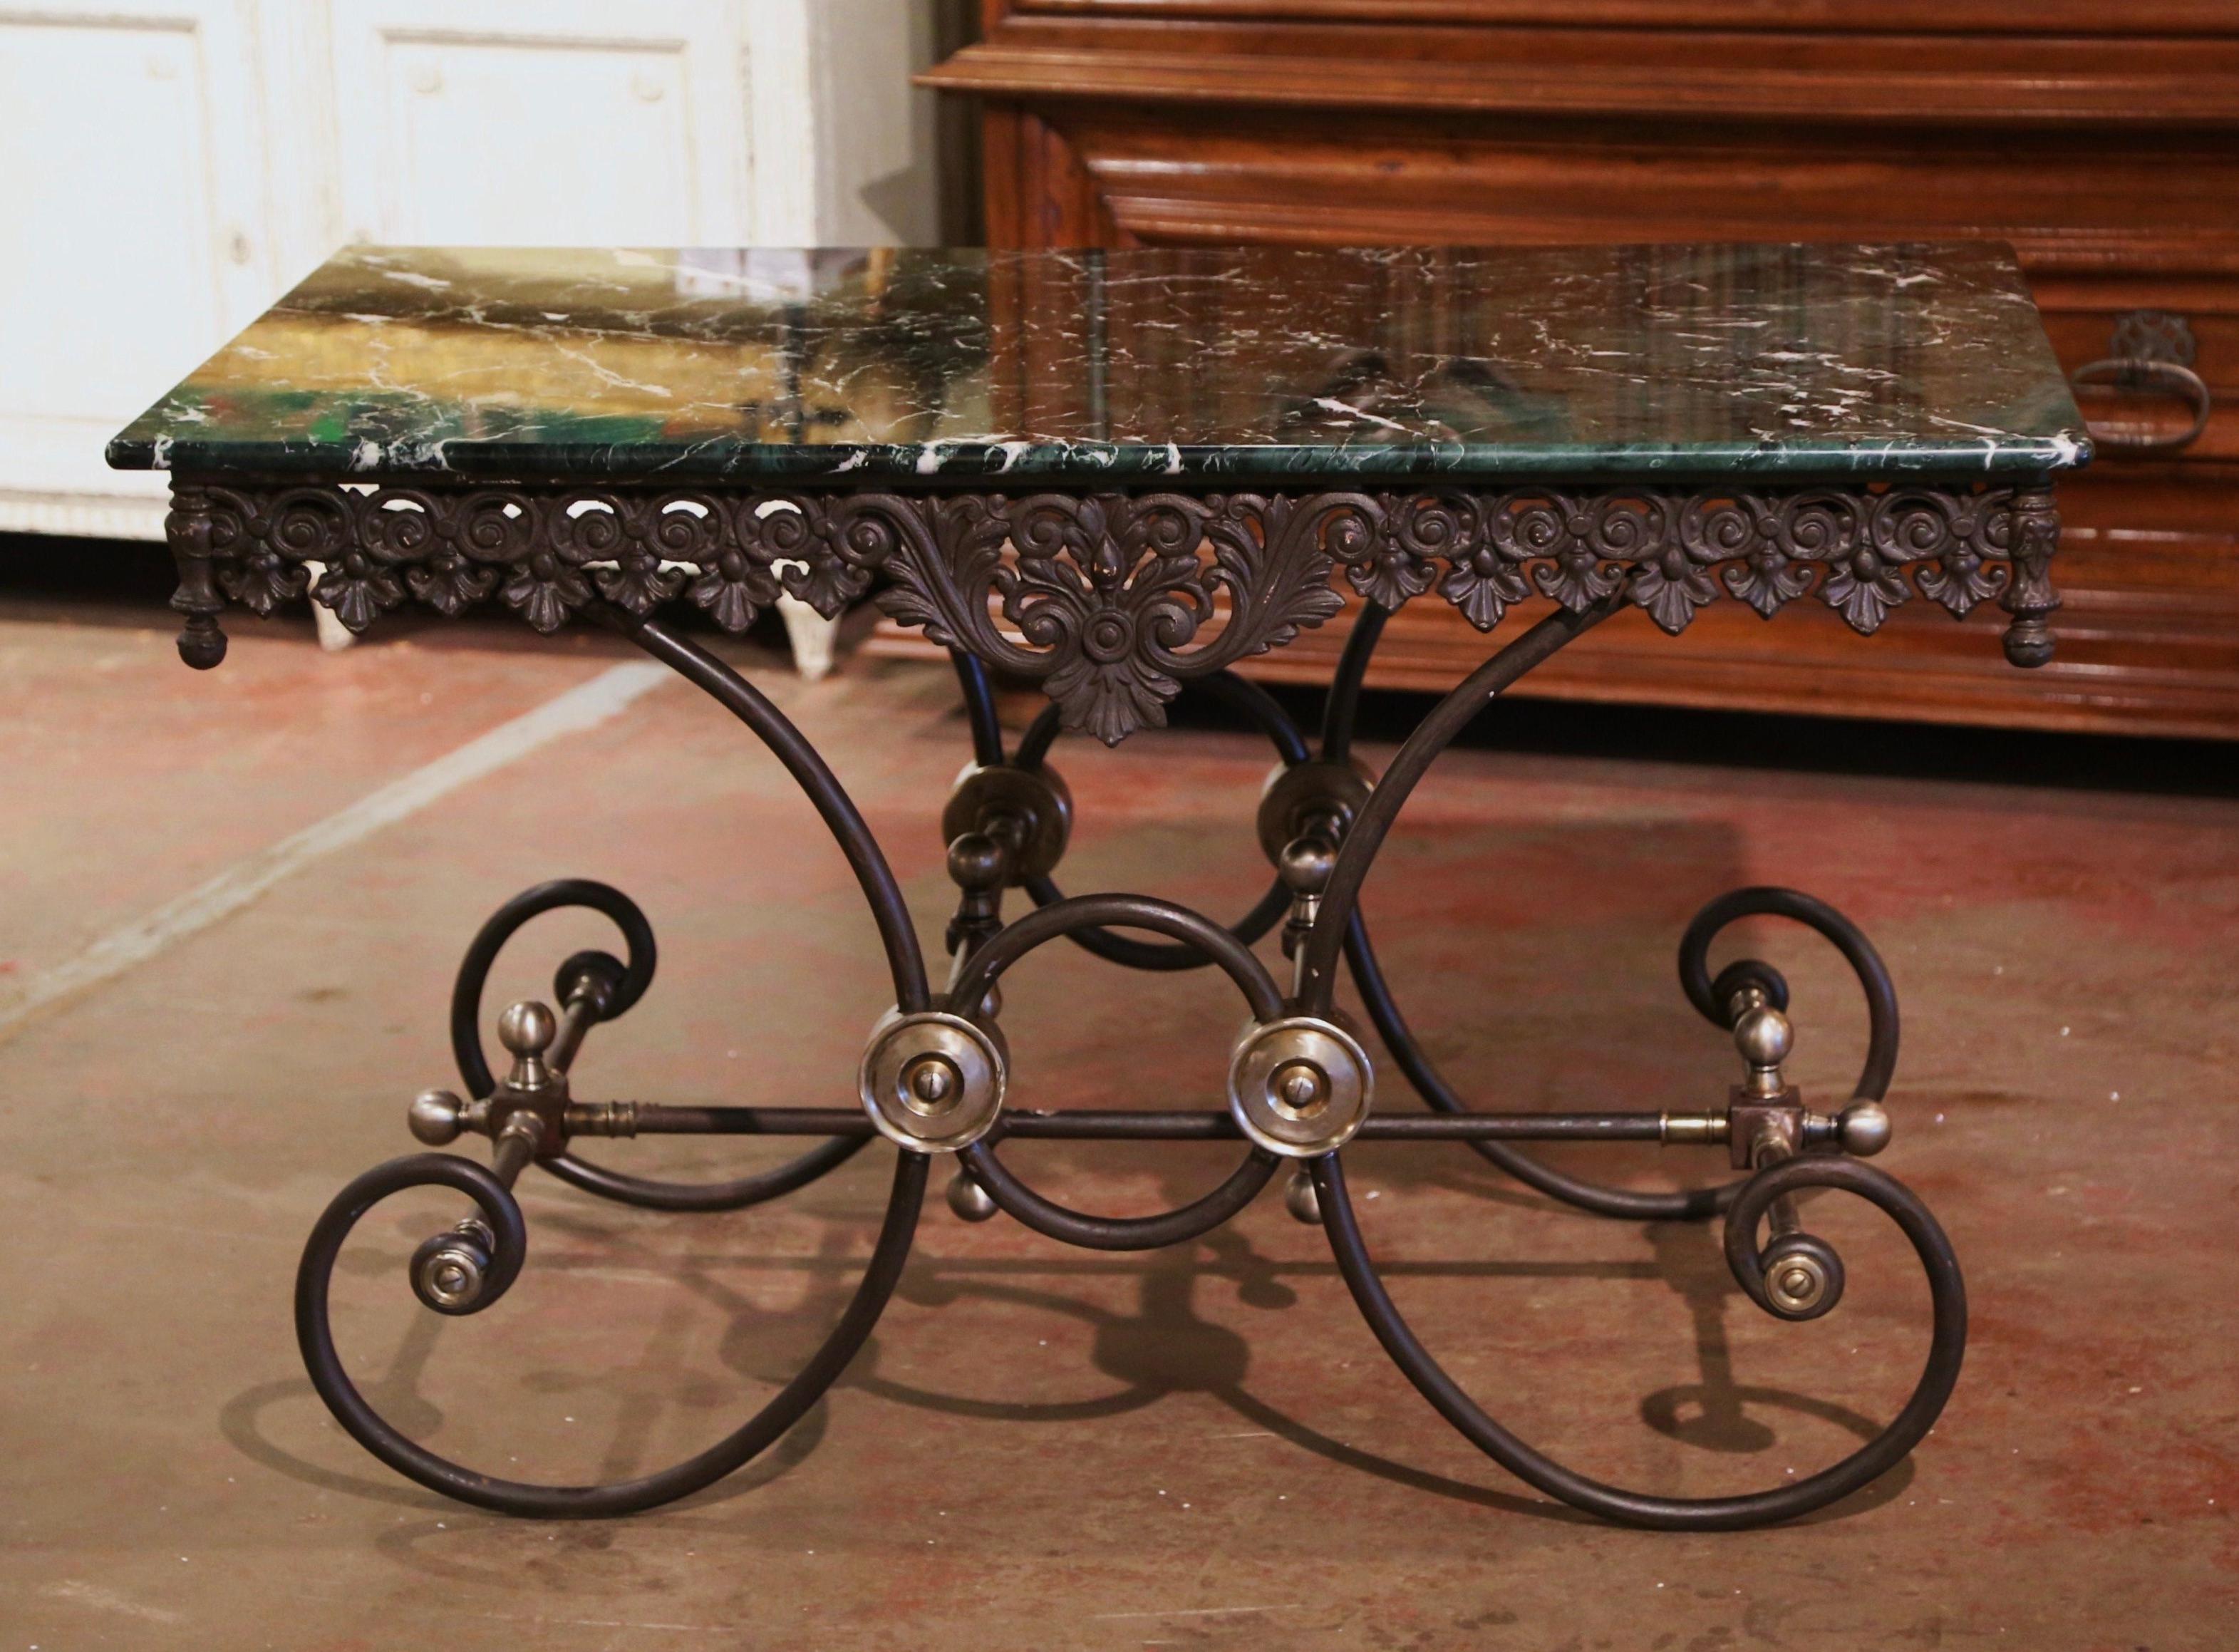 Crafted in France circa 1960, this antique pastry table stands on scrolled legs over an intricate stretcher embellished with decorative bronze mounts, rosettes and finials. The table features a decorative scalloped and pierced apron on all four